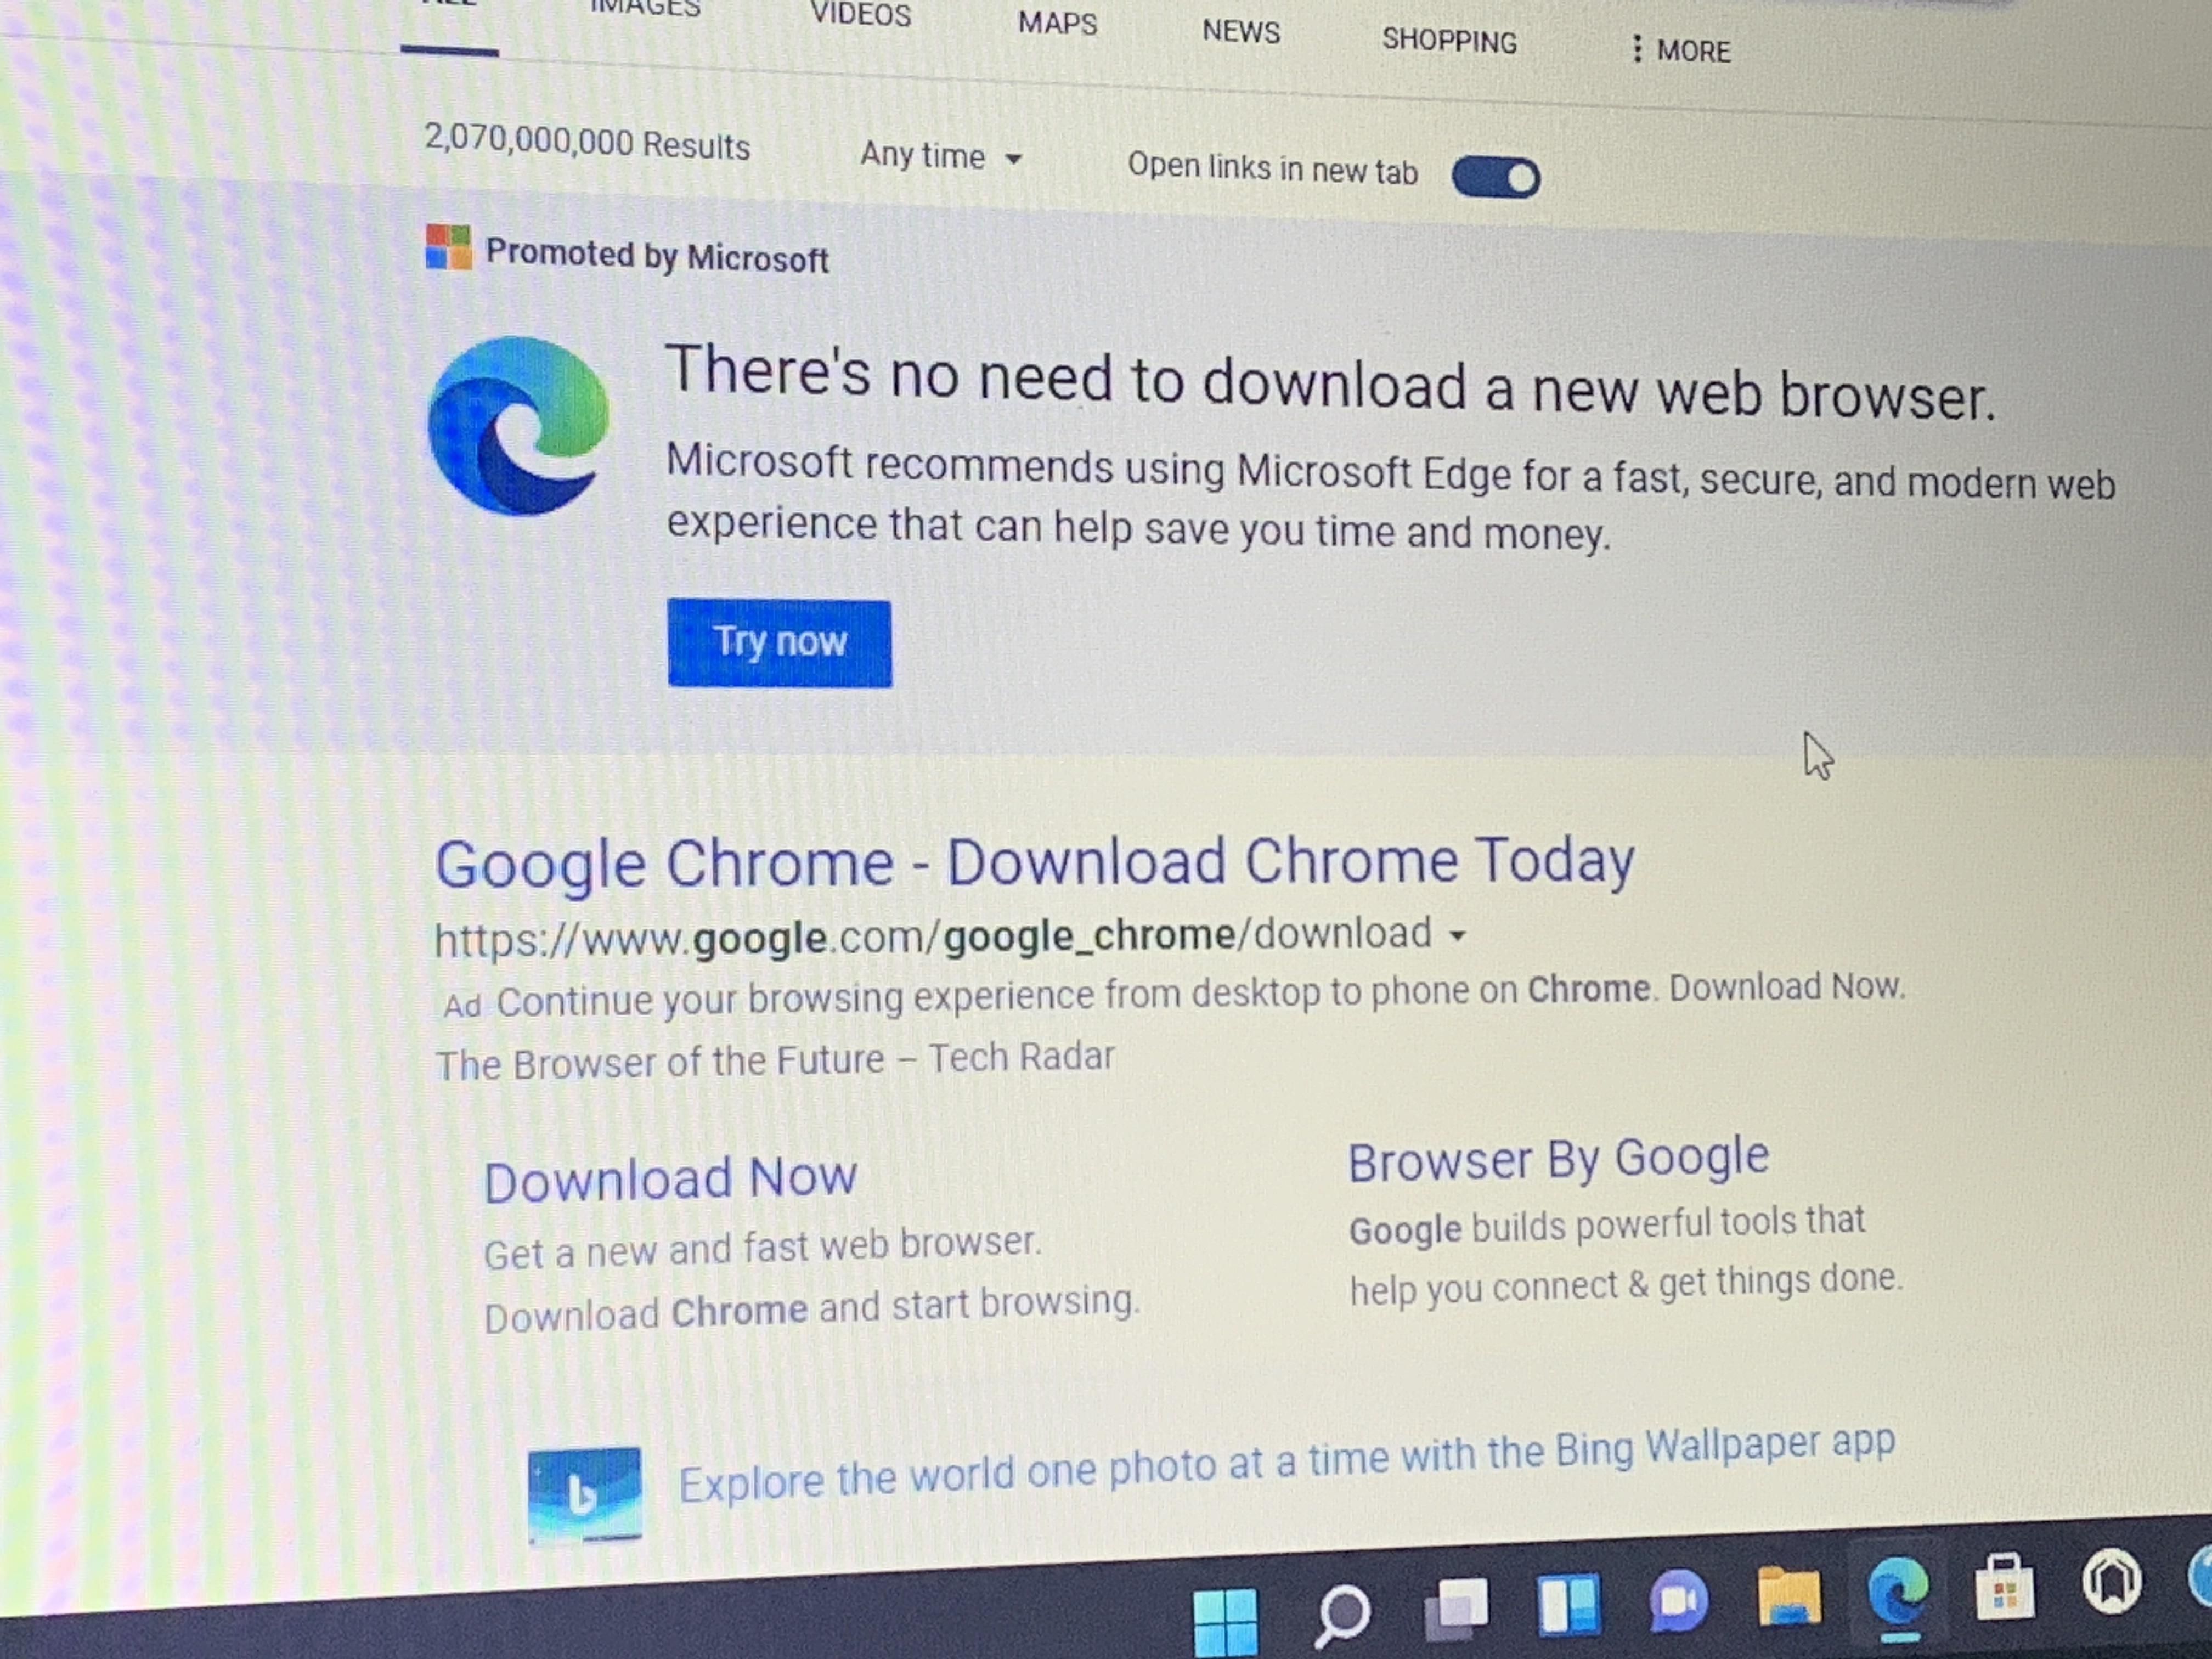 I bought my wife a little work laptop since she is going to start working from home. This message popped up after she used Edge to search for Chrome. I laughed pretty hard.